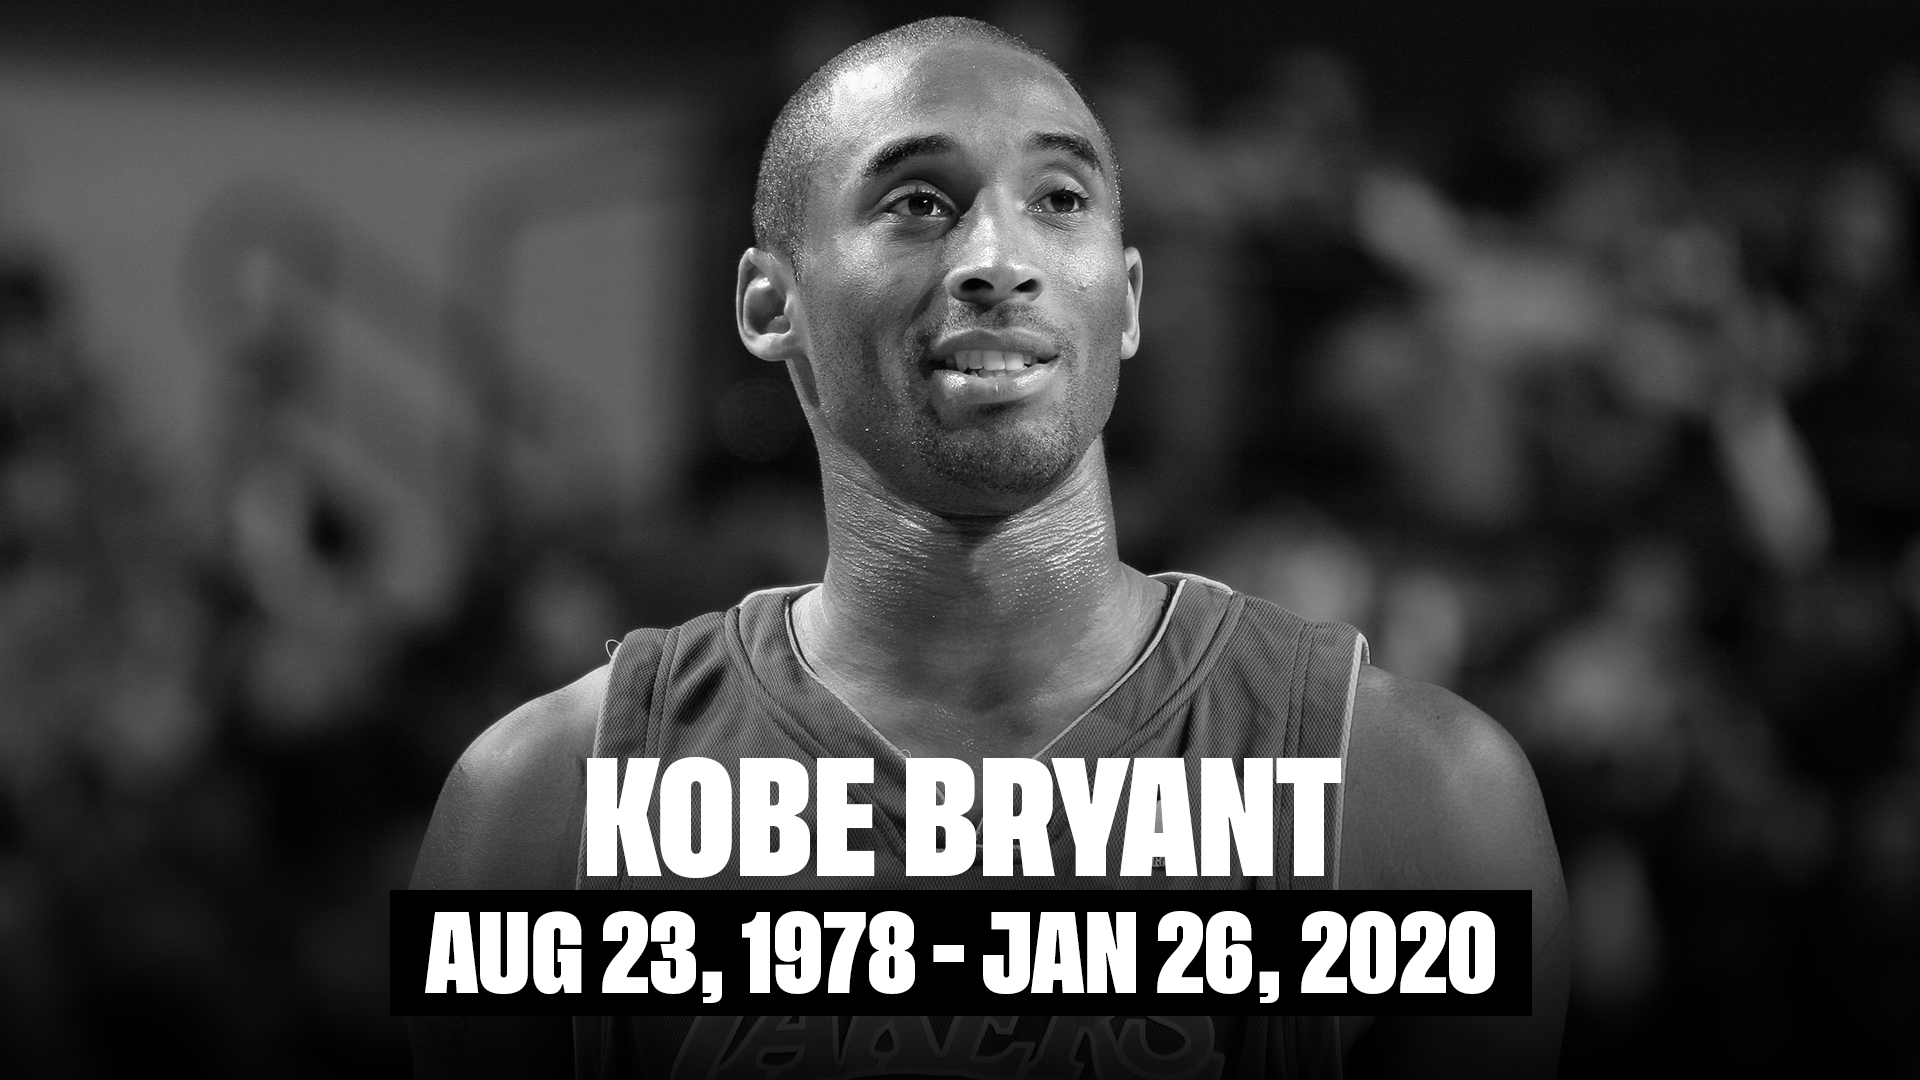 The world reacts to Kobe Bryant's tragic death in a